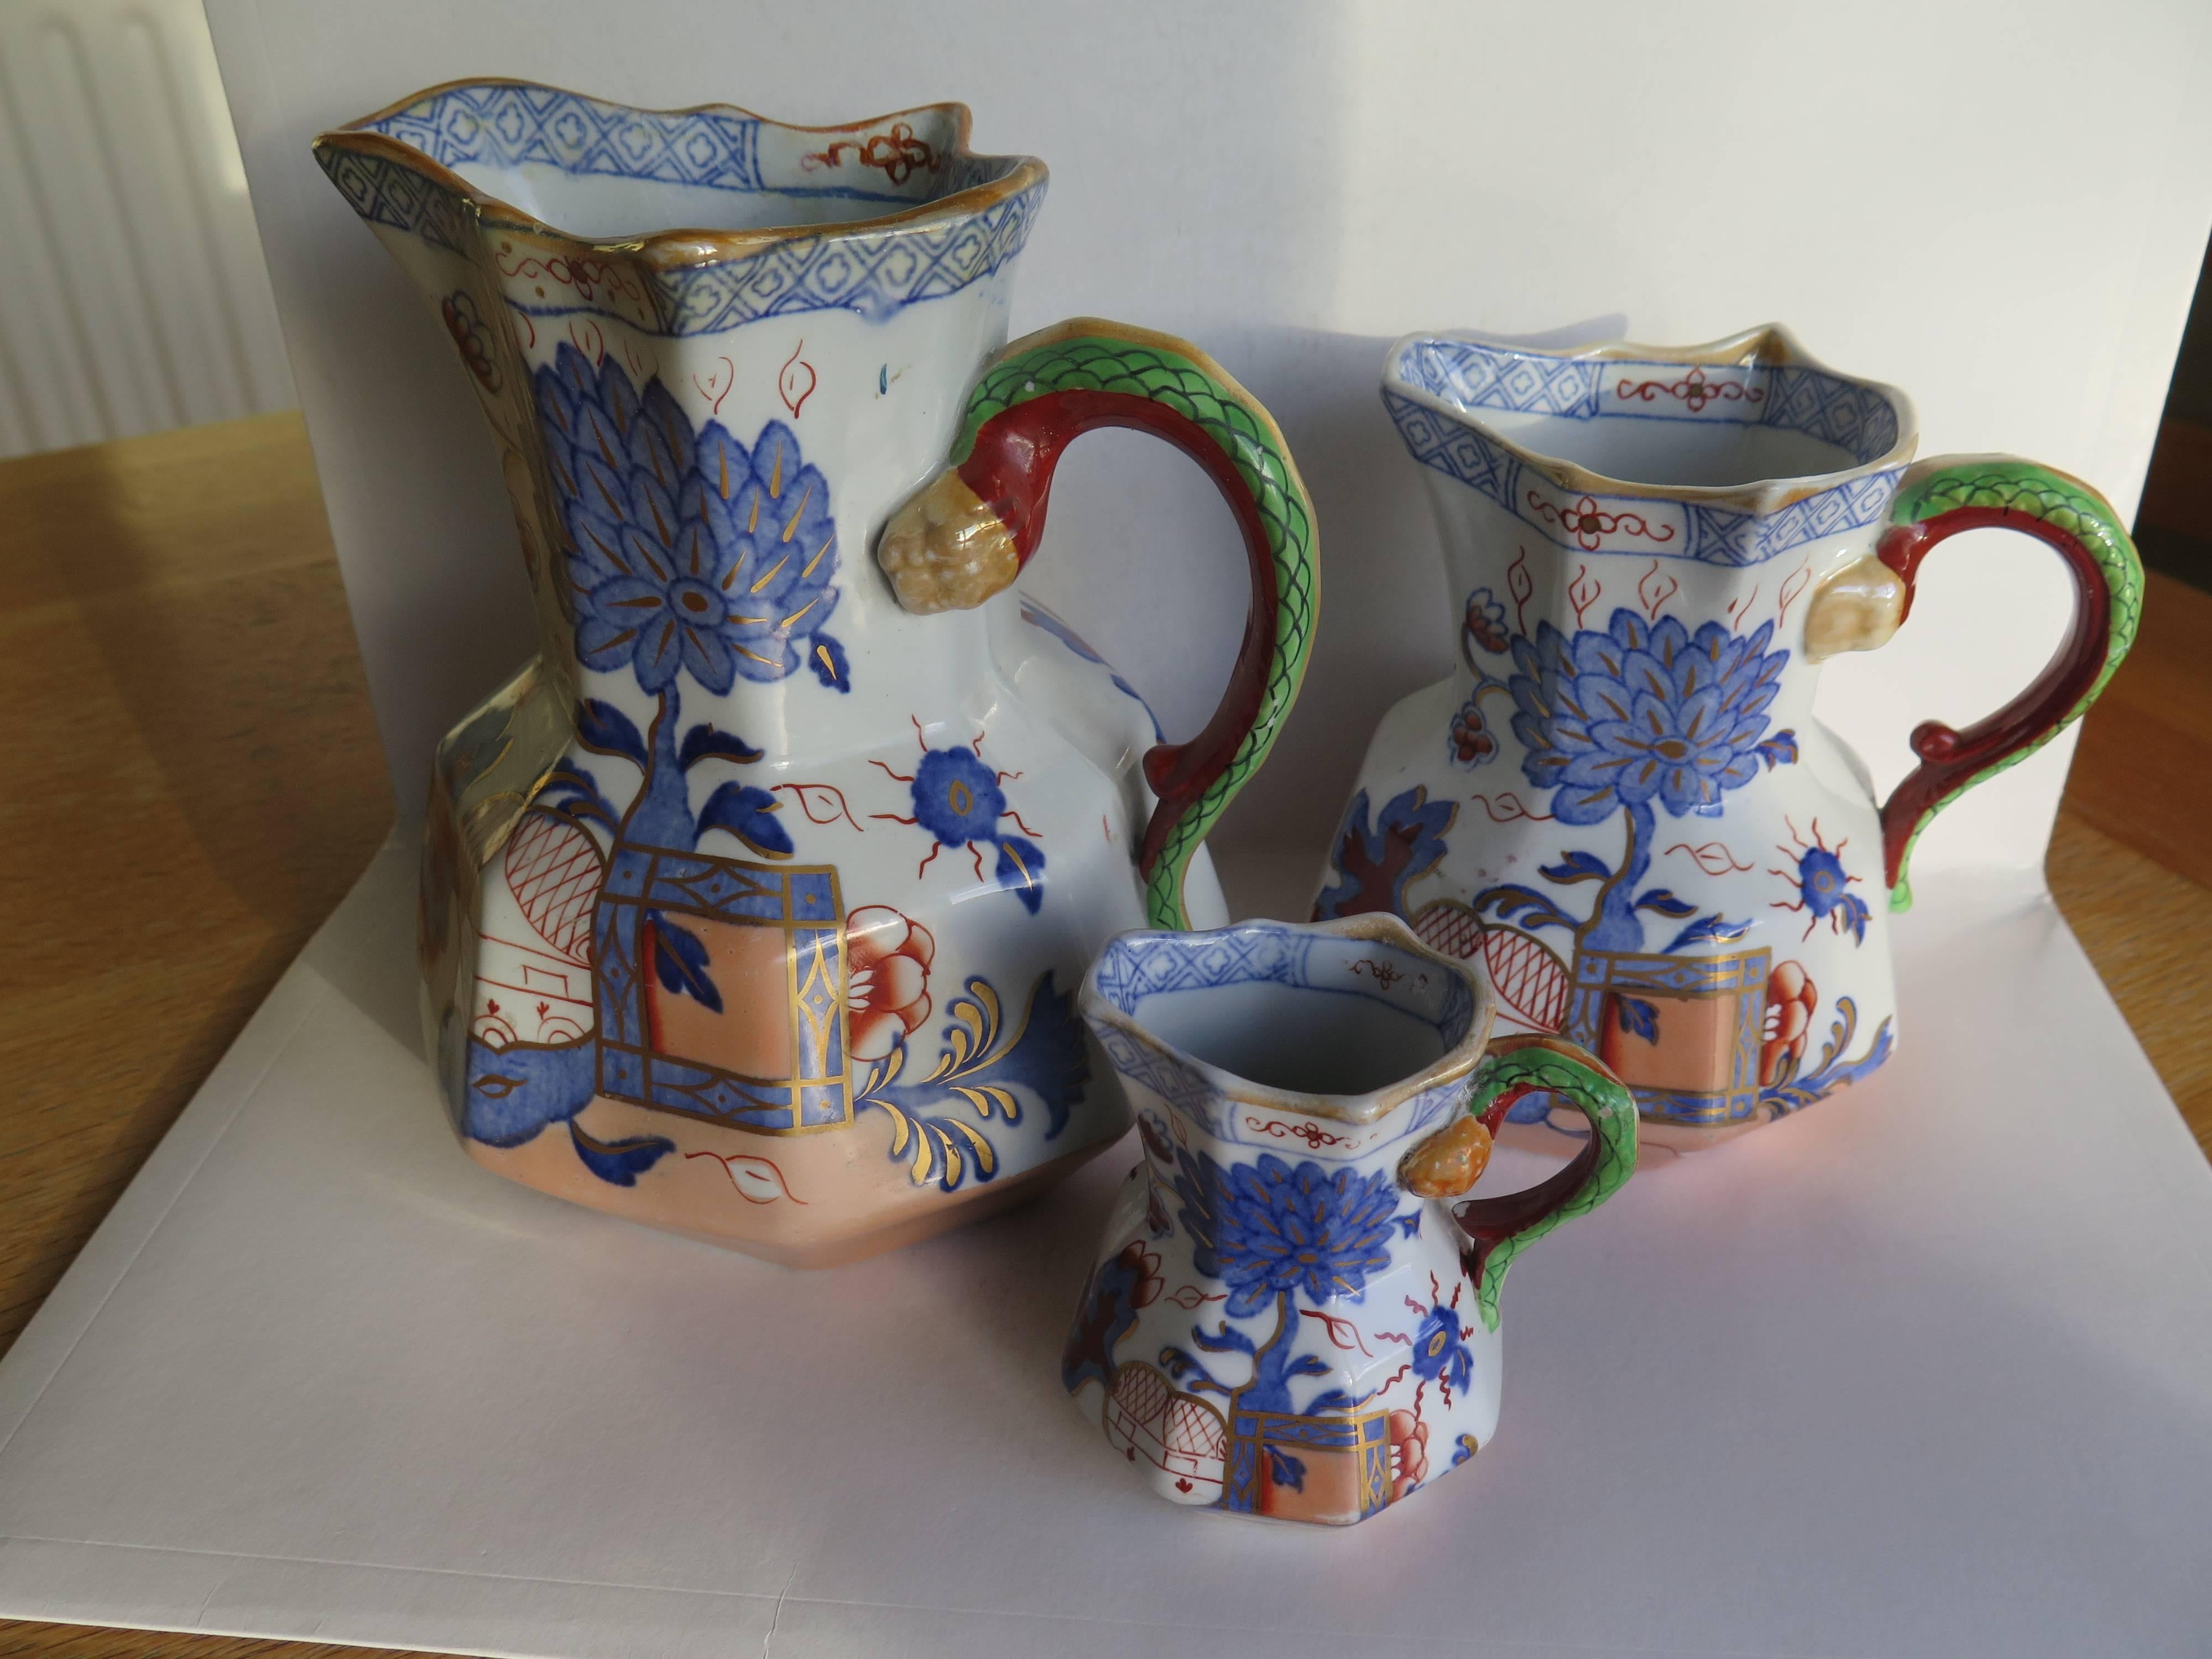 Graduated trio of MASONS IRONSTONE Hydra Jugs or Pitchers - ALL in the JARDINIERE  PATTERN
The pattern features an octagonal flower box with a large floral stem and apple shape growing from it. The apple contains an outline of a two storey Chinese